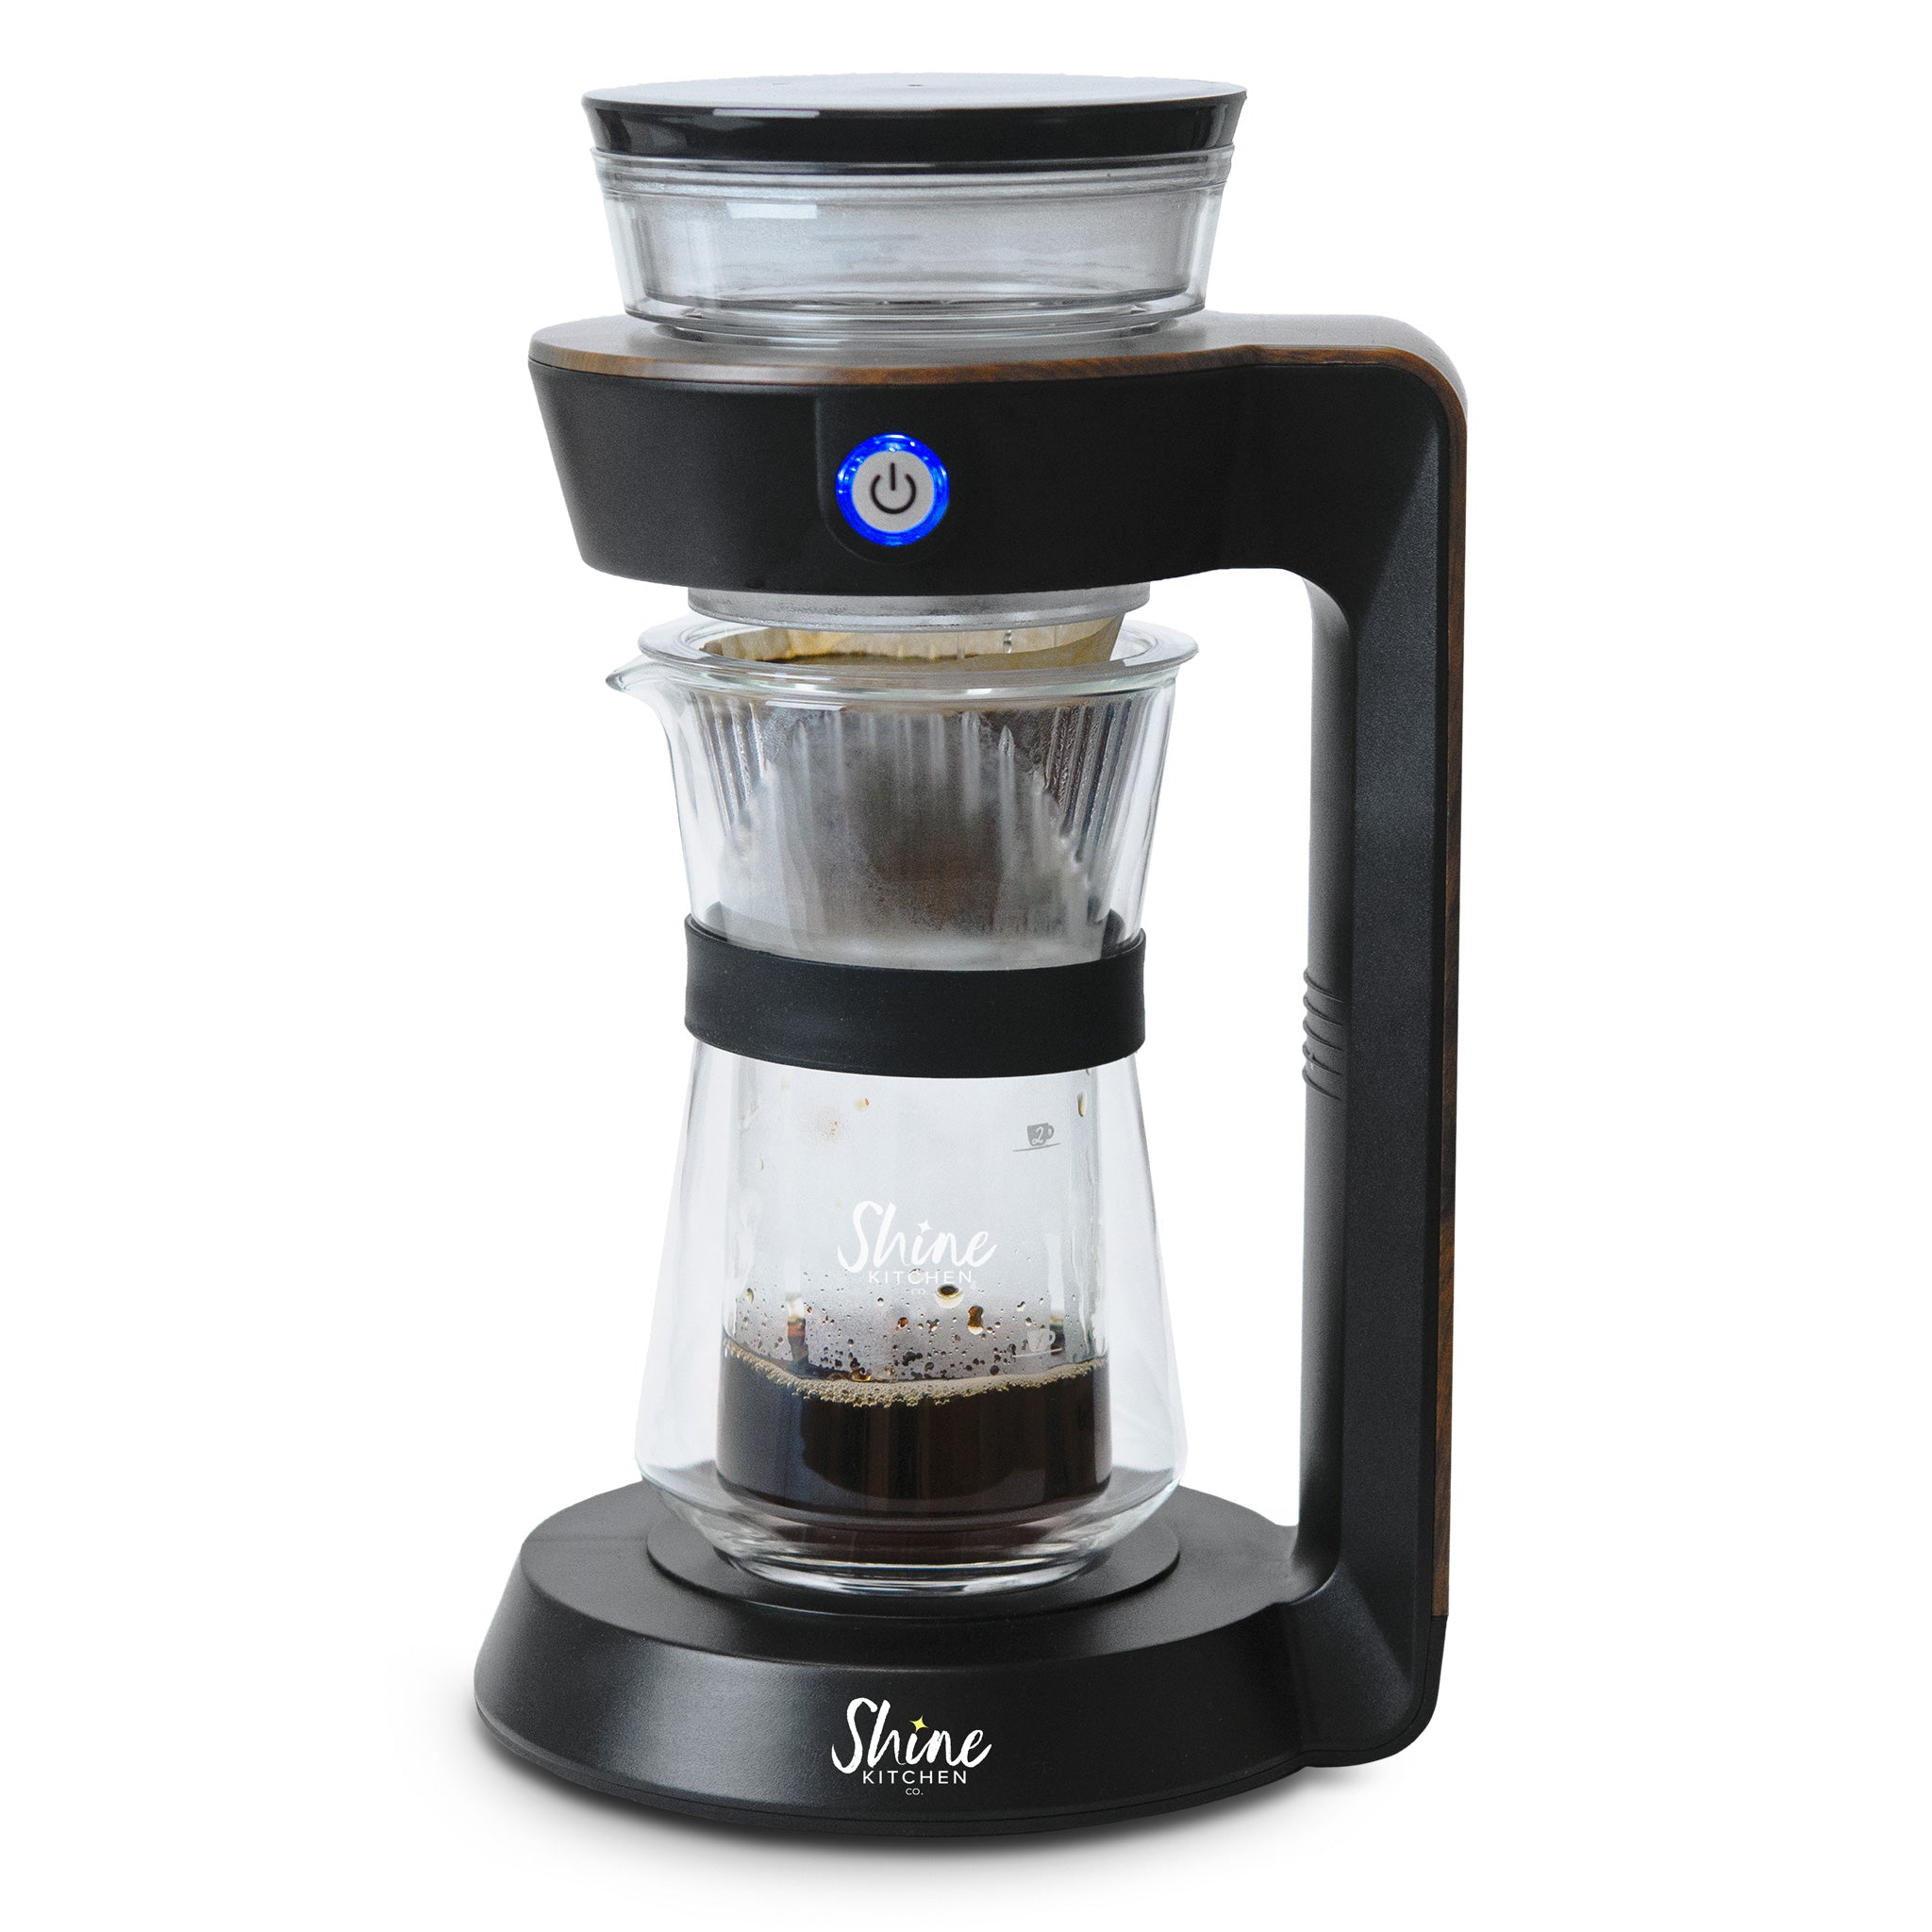 12-Cup The Scoop Two Way Coffee Maker, Product Type: Automatic